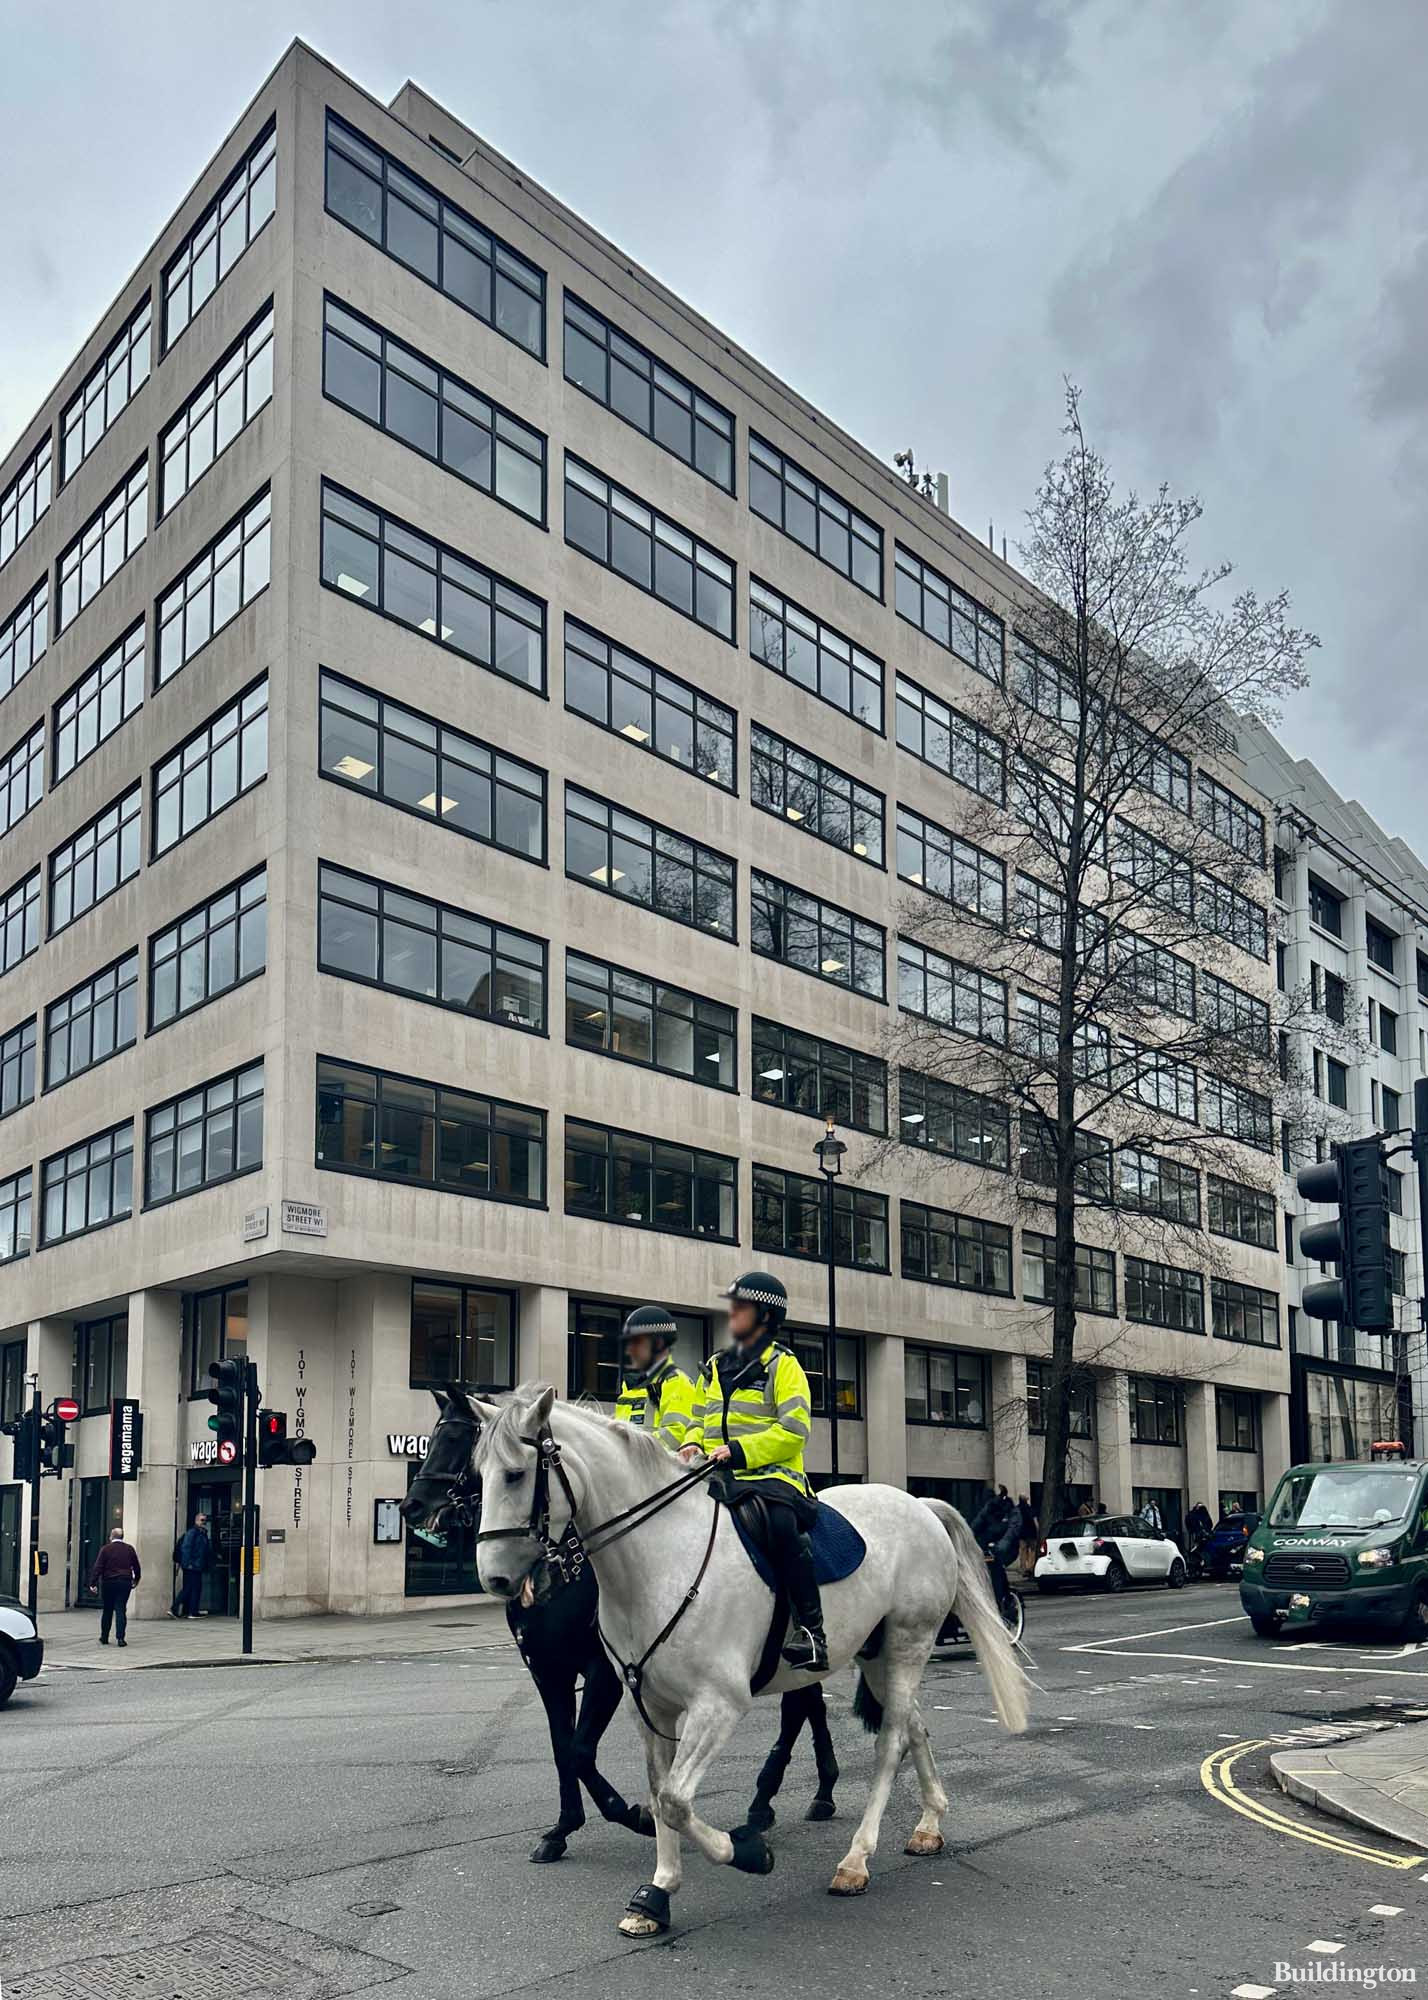 Metropolitan Police on horses in front of 101 Wigmore Street building in Marylebone, London W1.